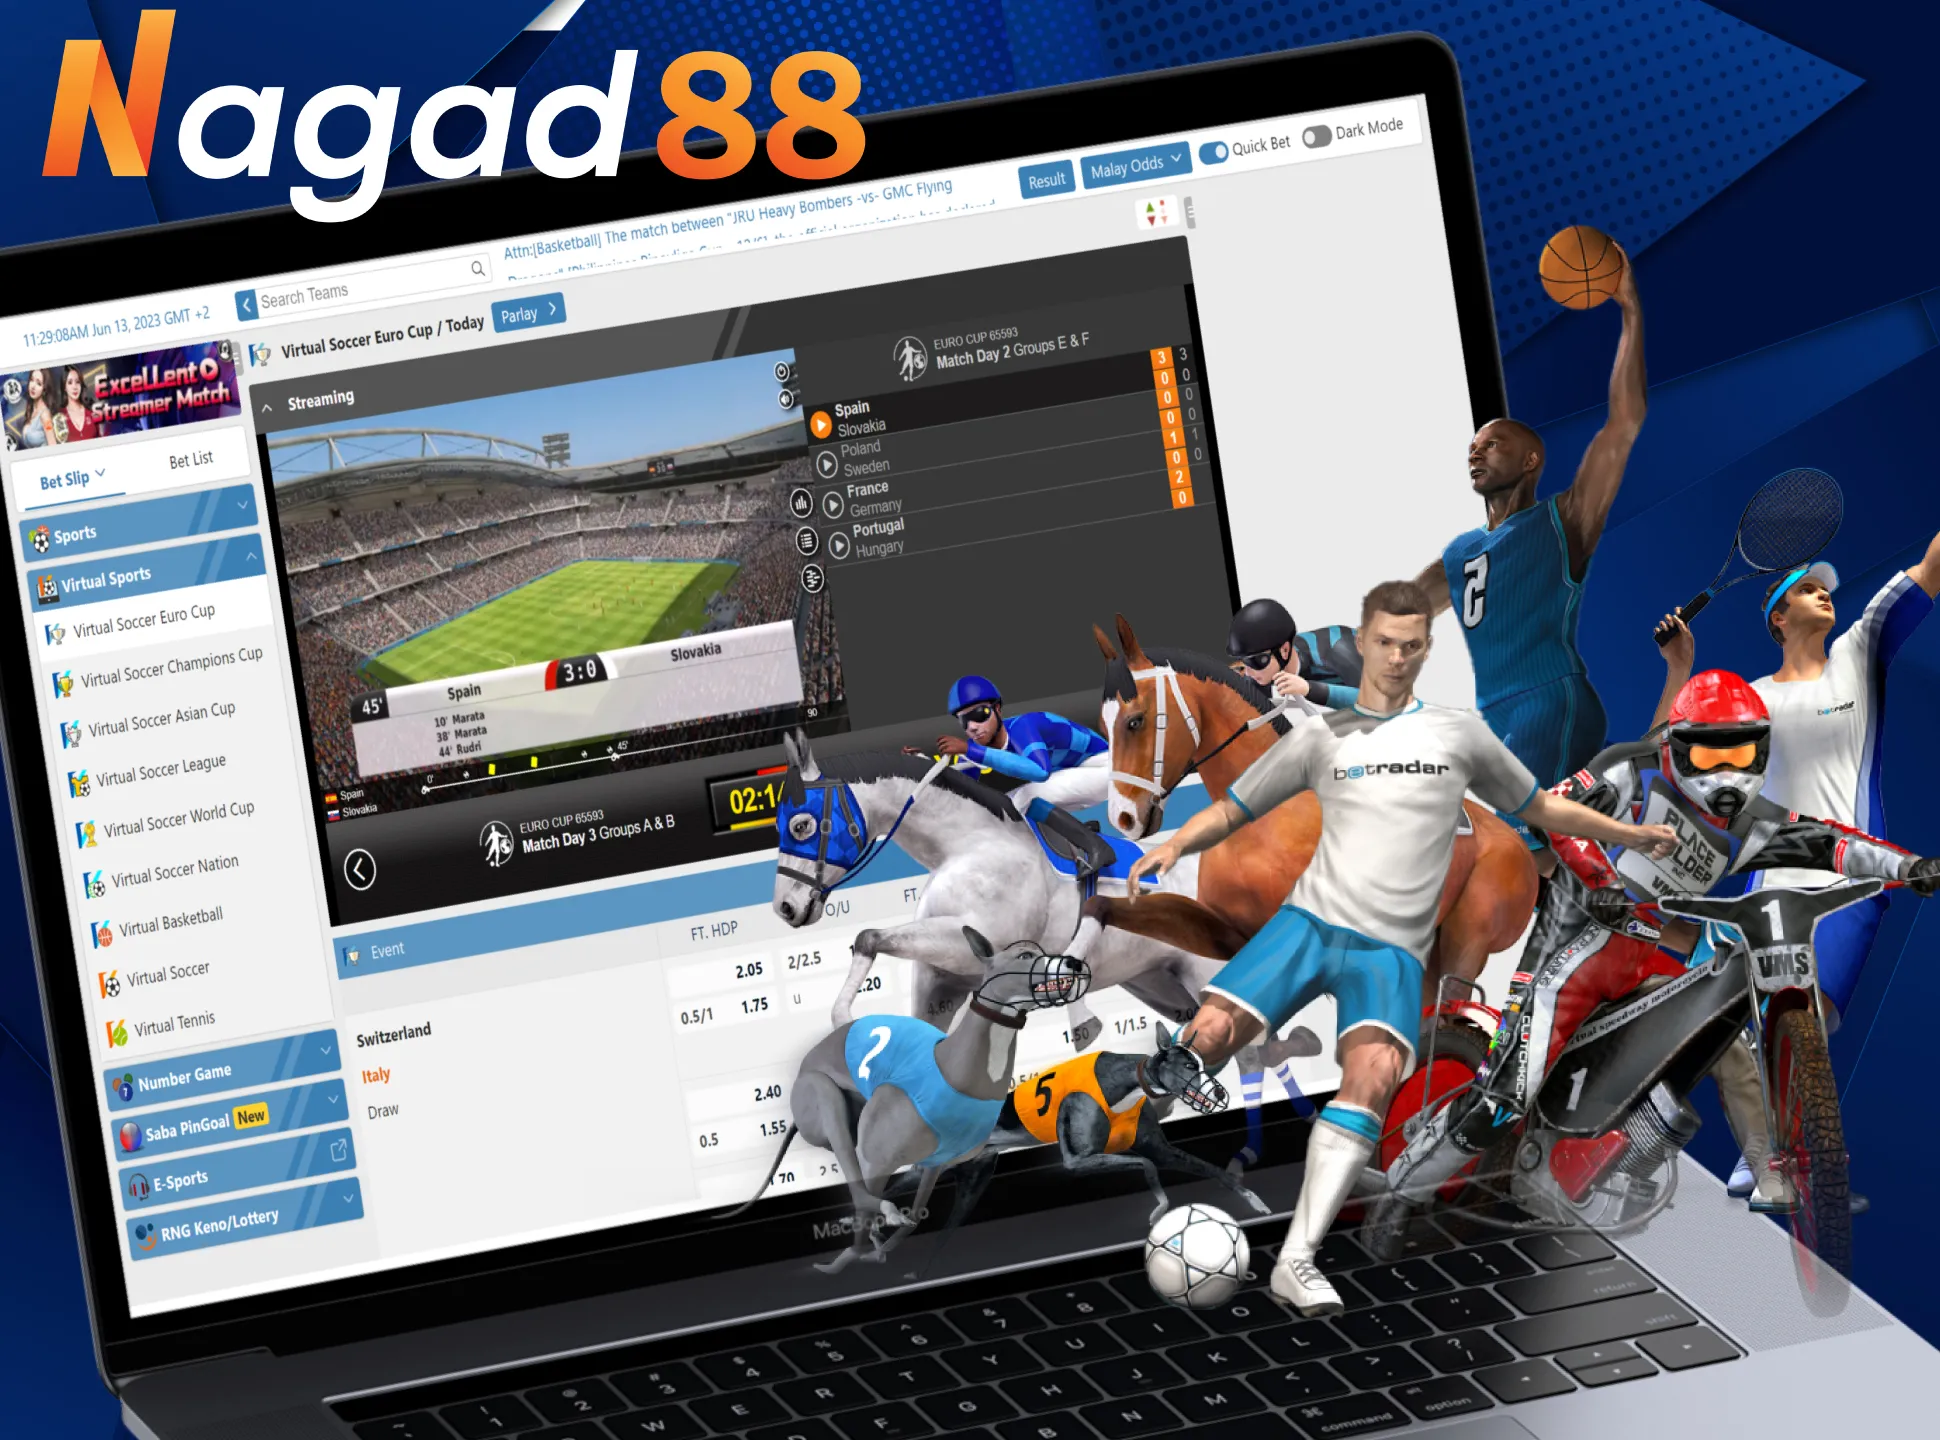 In Nagad88, you can bet on virtual sports as well.